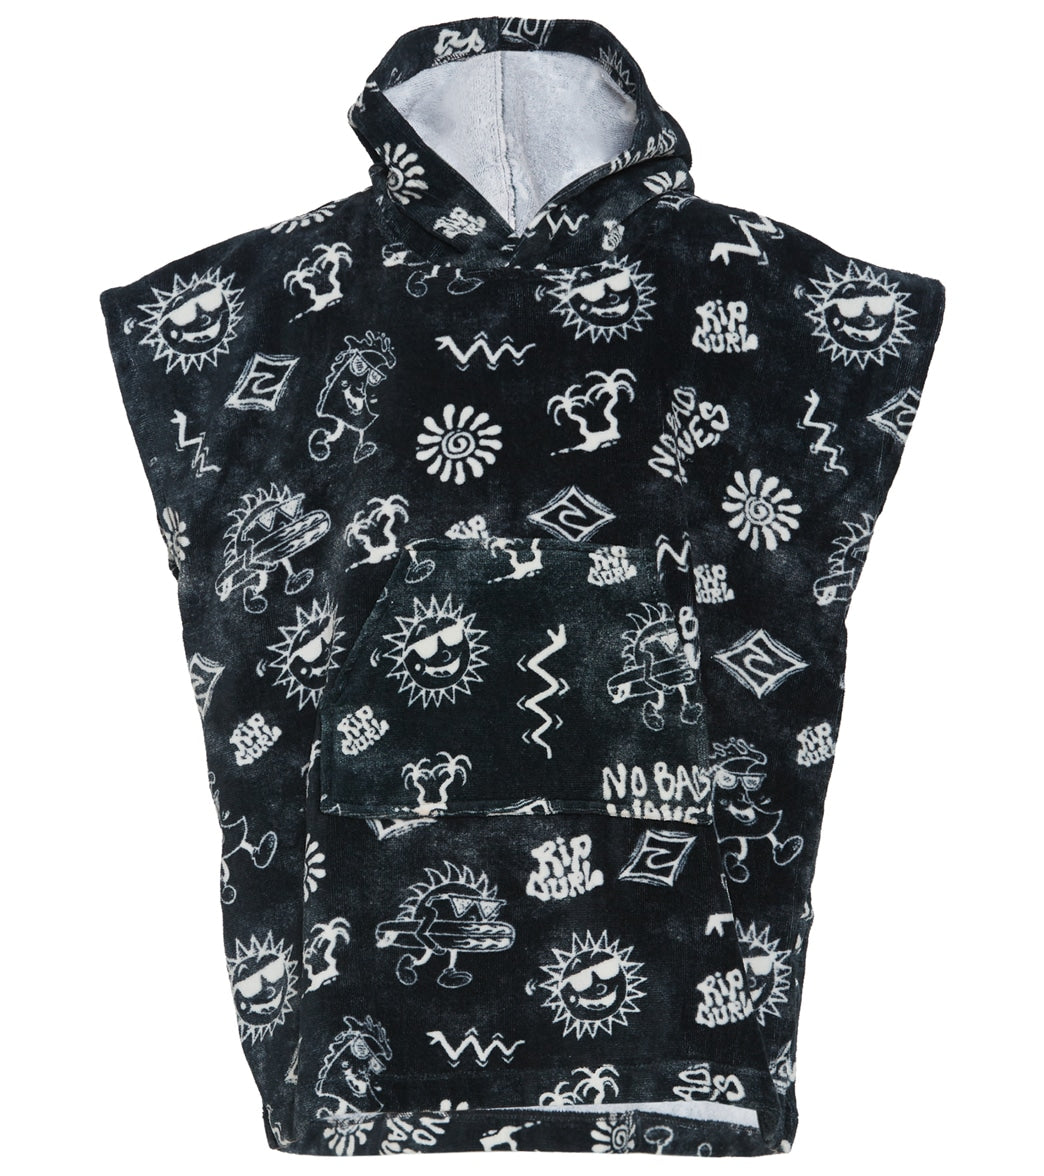 Rip Curl Boys' Printed Hooded Towel at SwimOutlet.com